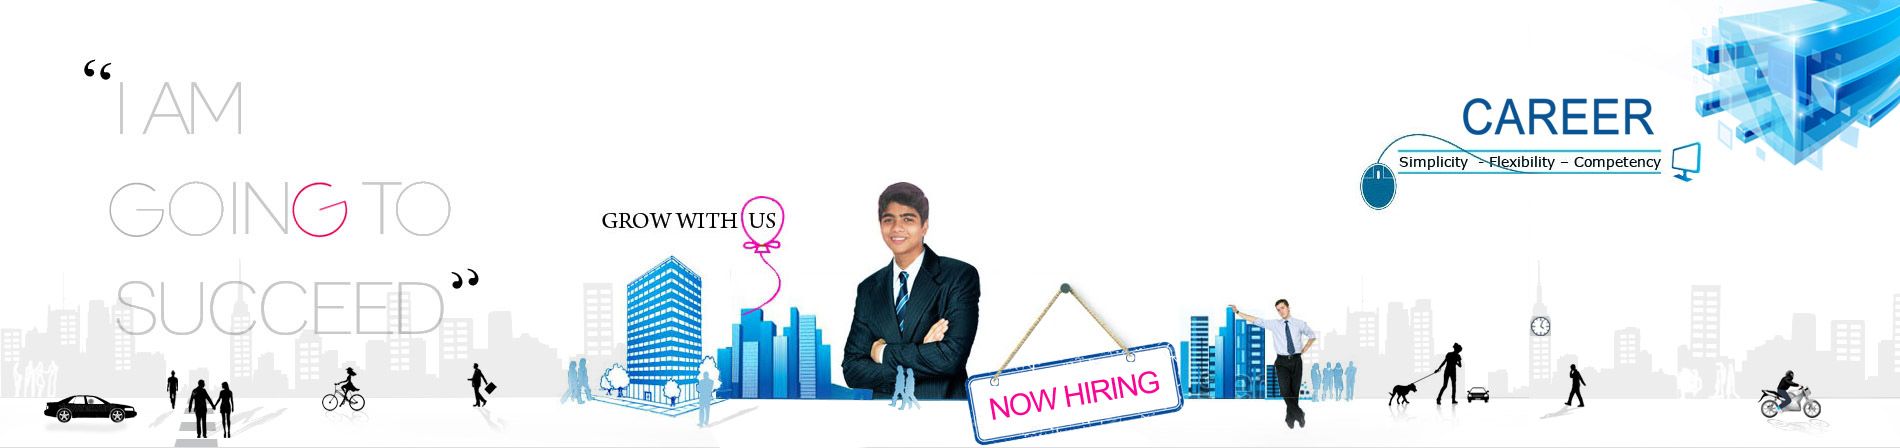 php job, web designing job, user interface job, mobile apps jobs in bangalore, chennai, nagercoil